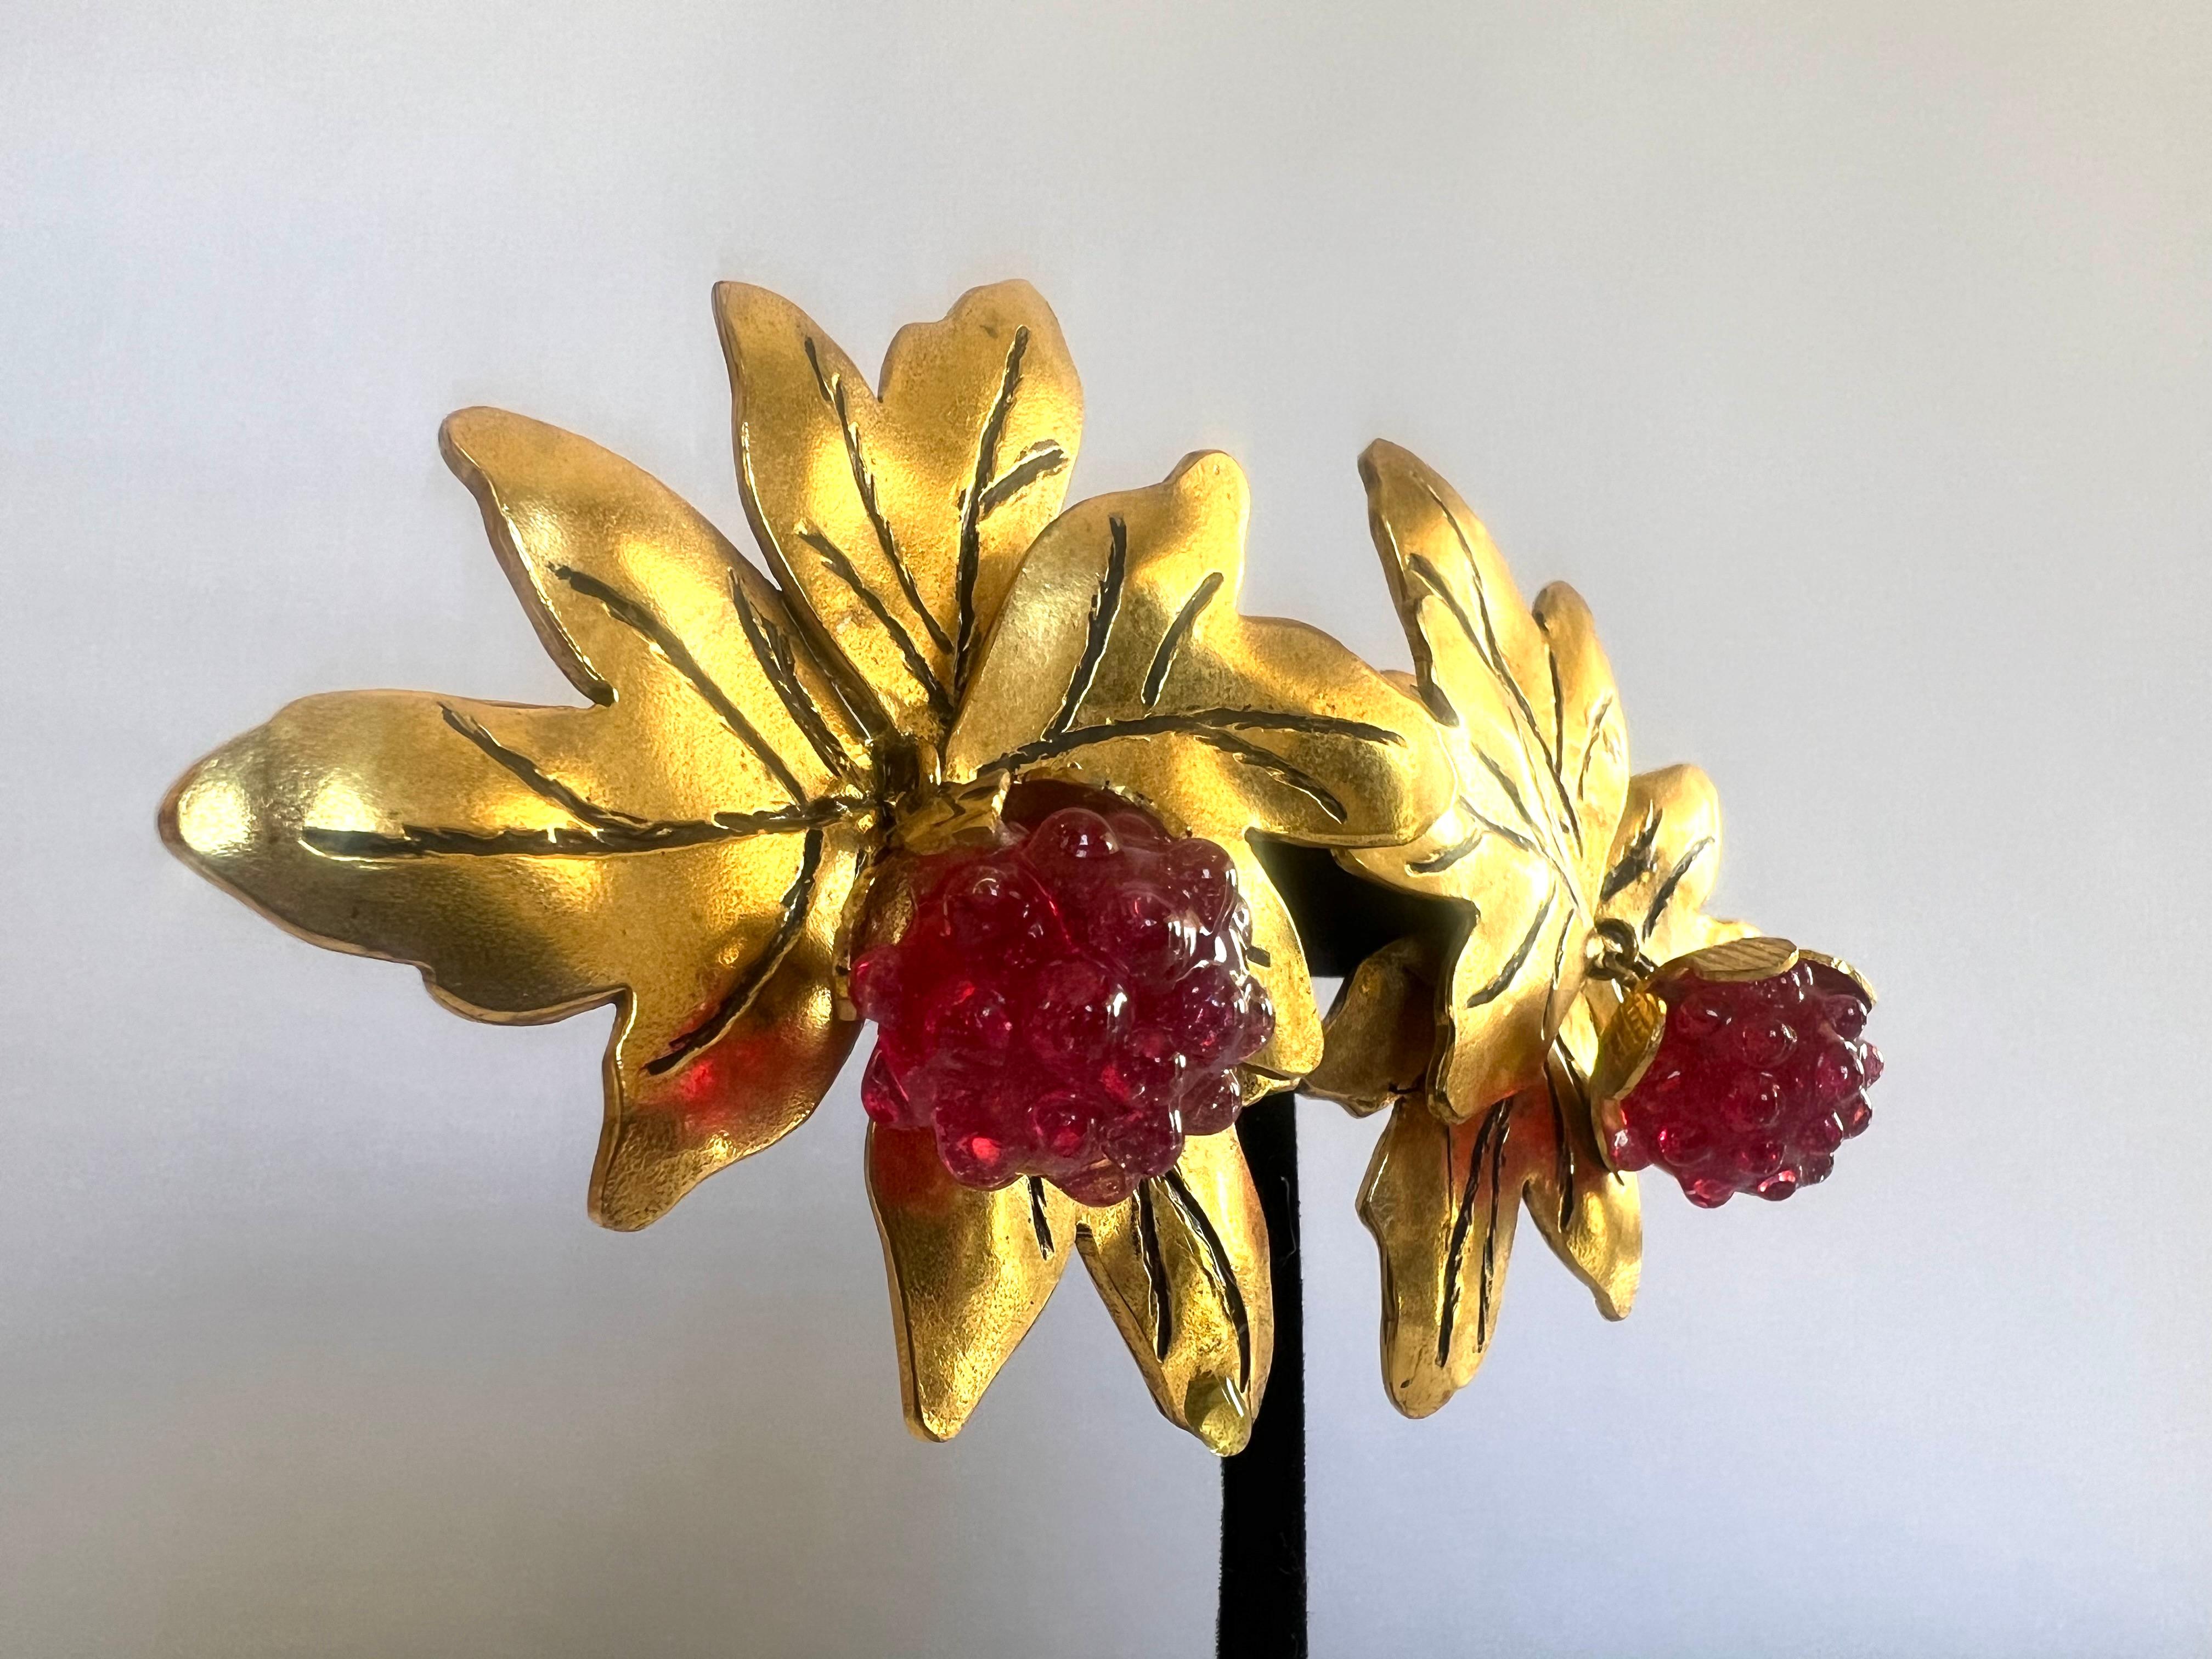 Scarce ornate vintage clip-on statement earrings by Isabel Canovas - featuring oversized gold and black leaves with red glass berry adornments.  